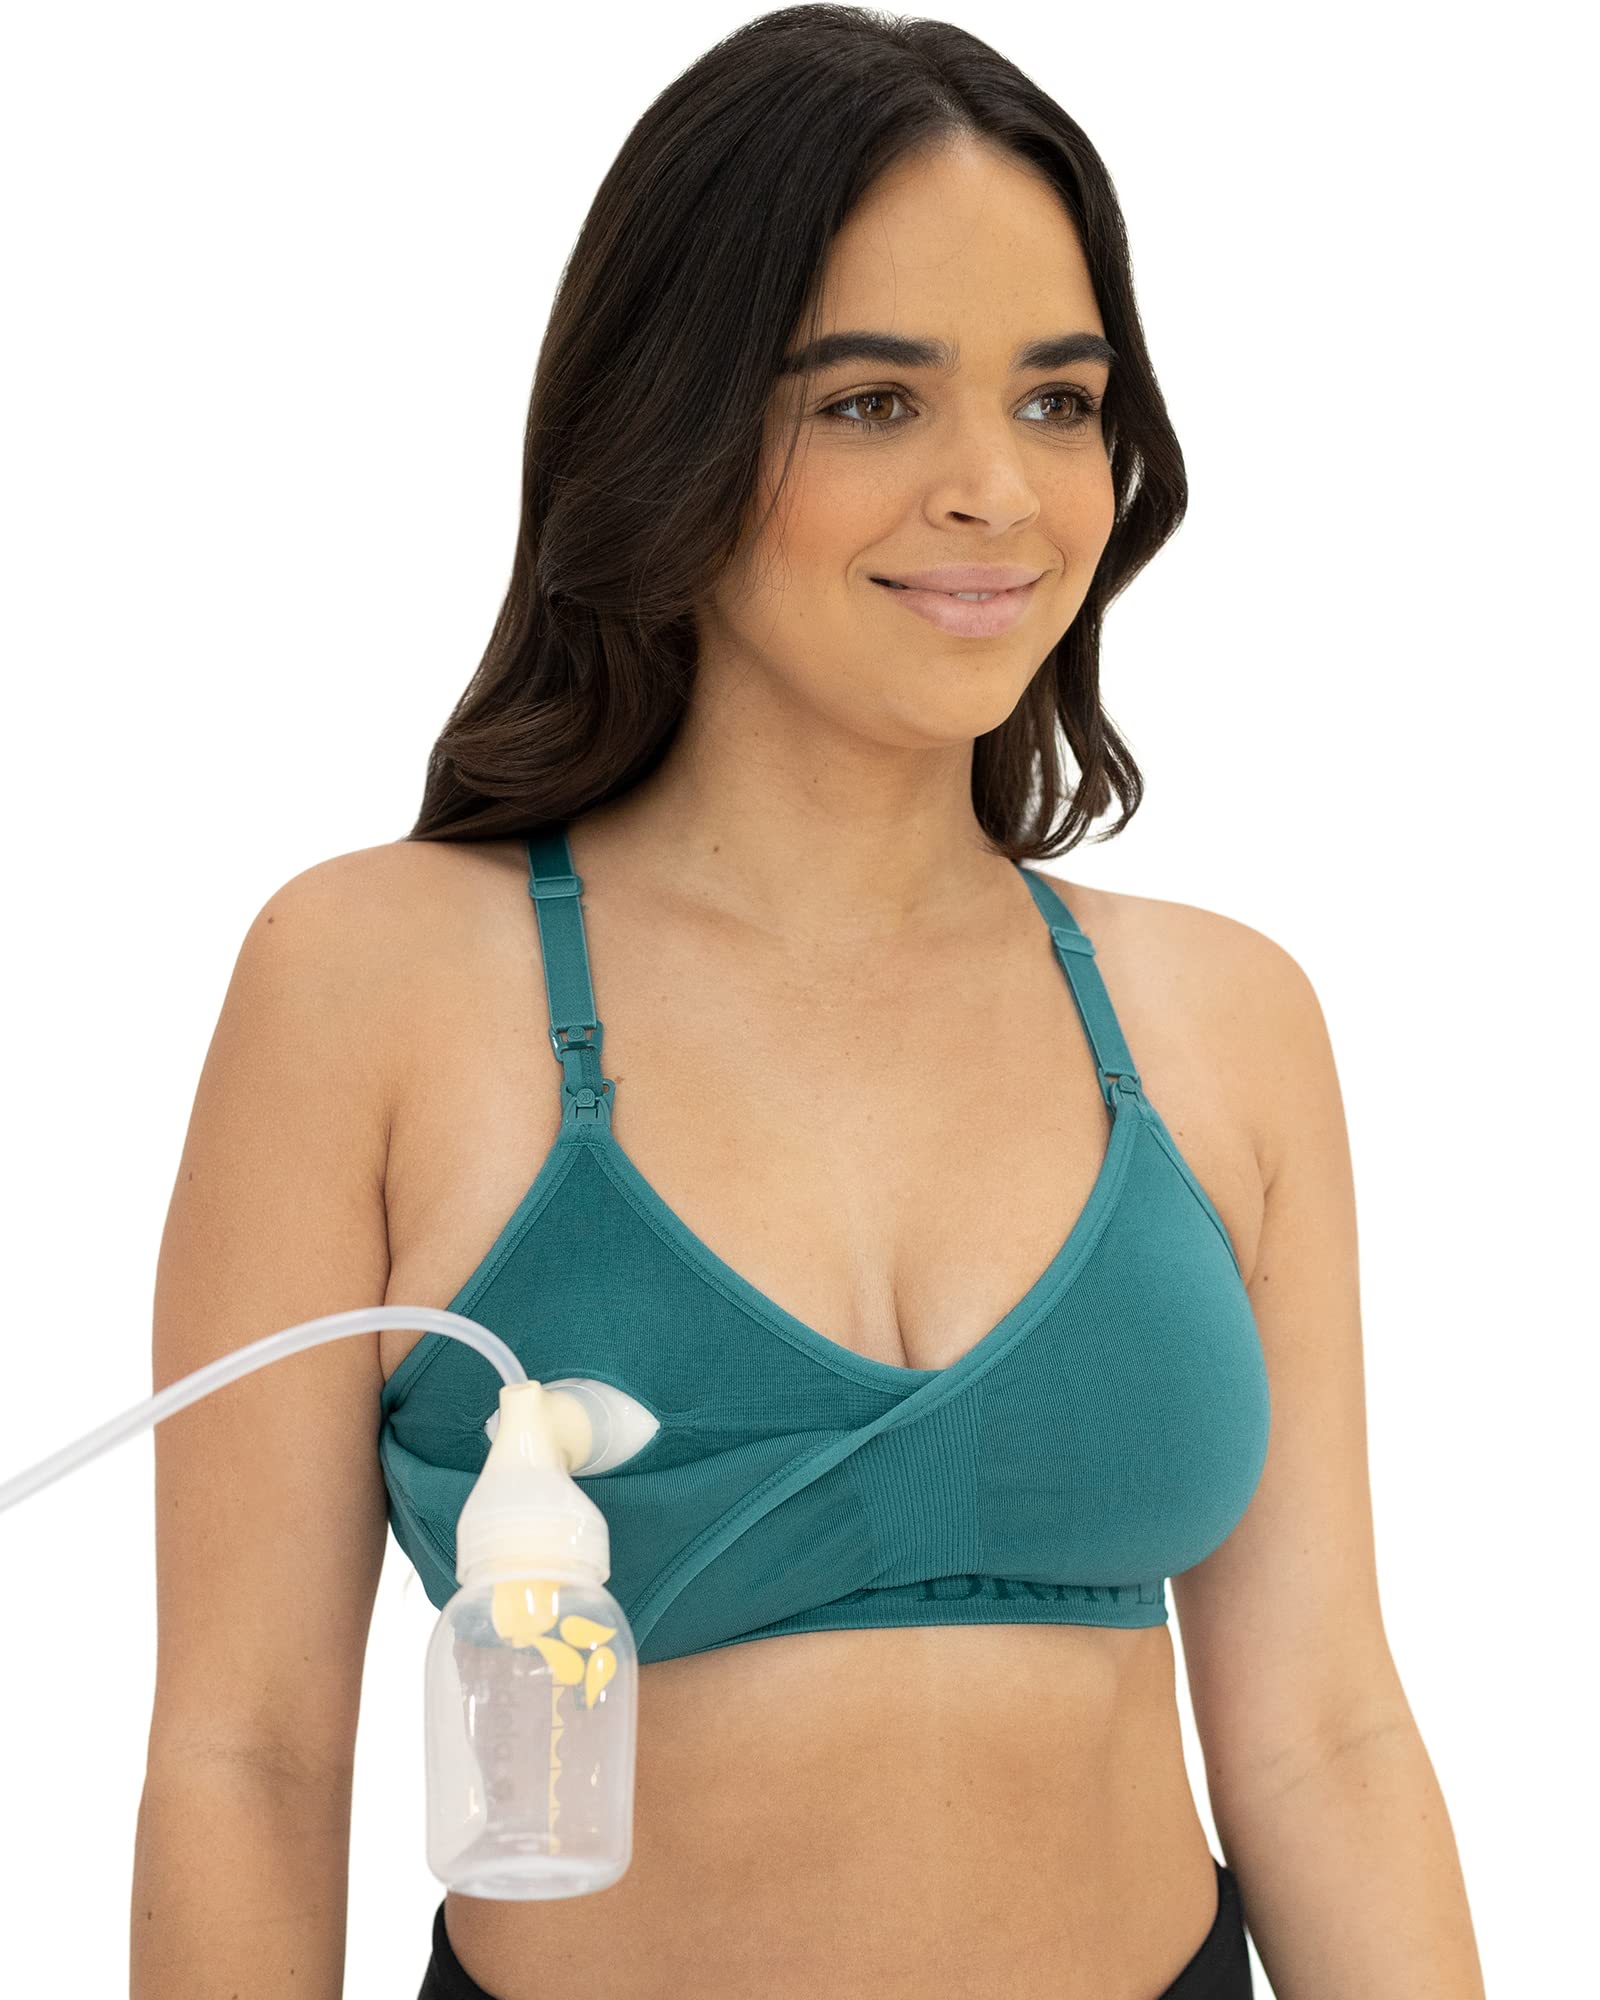 Kindred Bravely Hands Free Pumping Sports Bra (Teal, X-Large) & Organic Washable Breast Pads Bundle